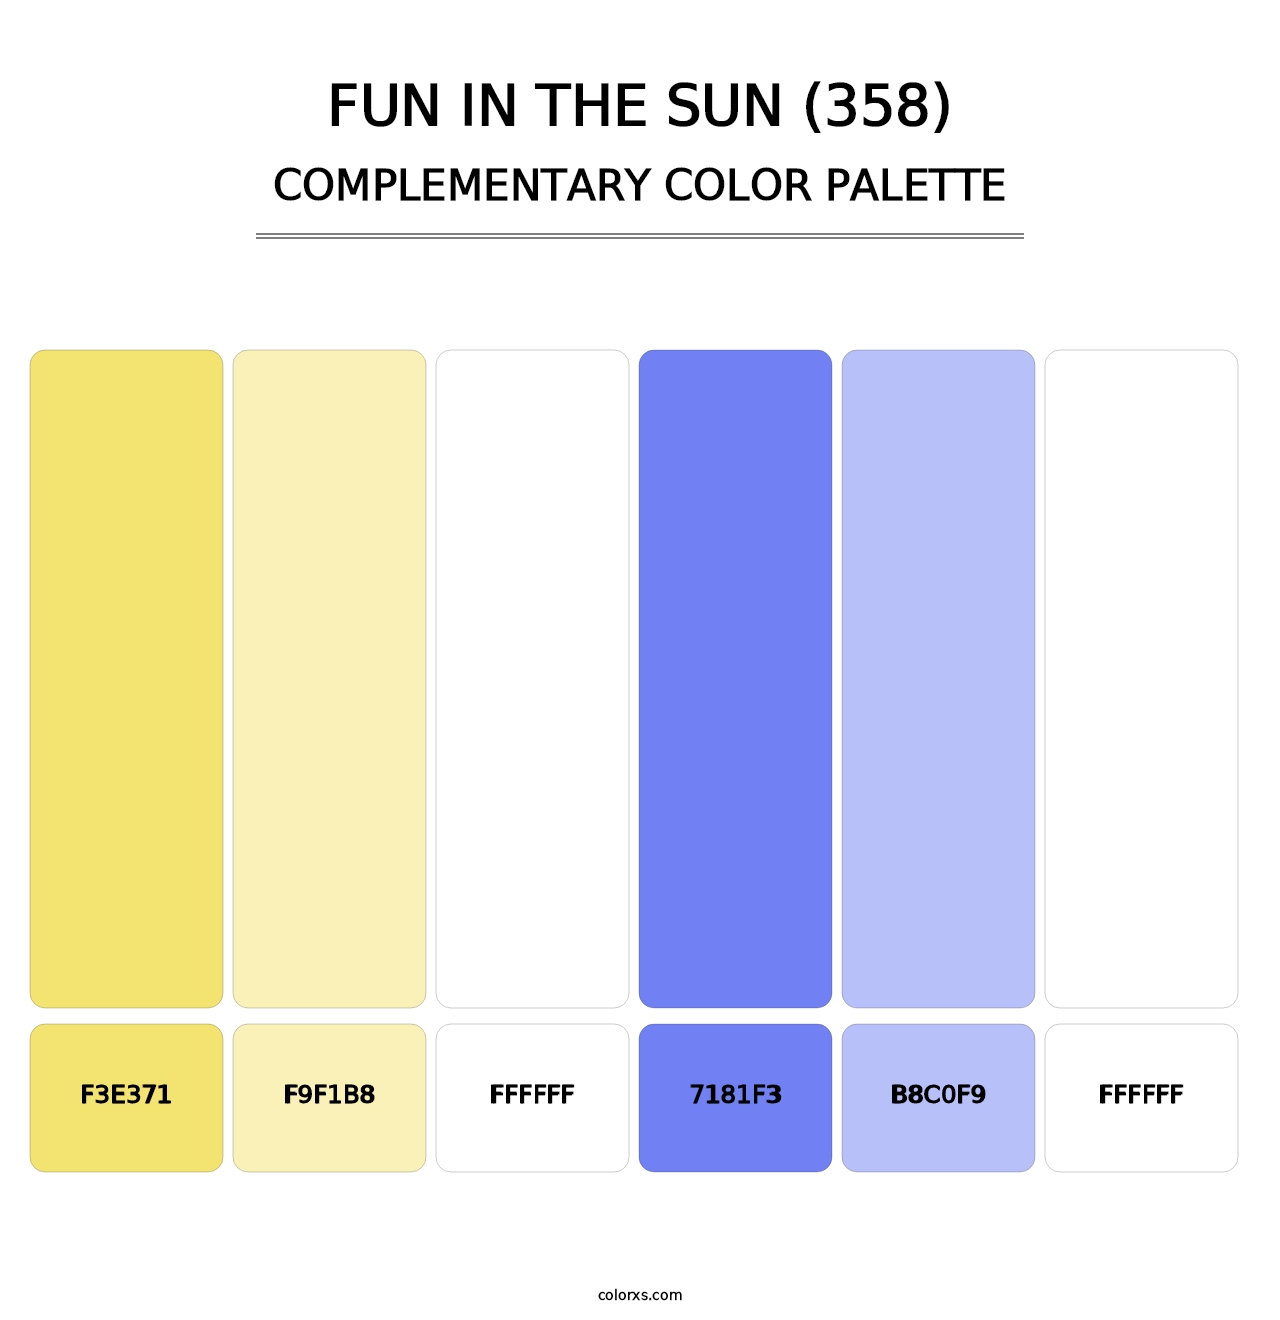 Fun in the Sun (358) - Complementary Color Palette